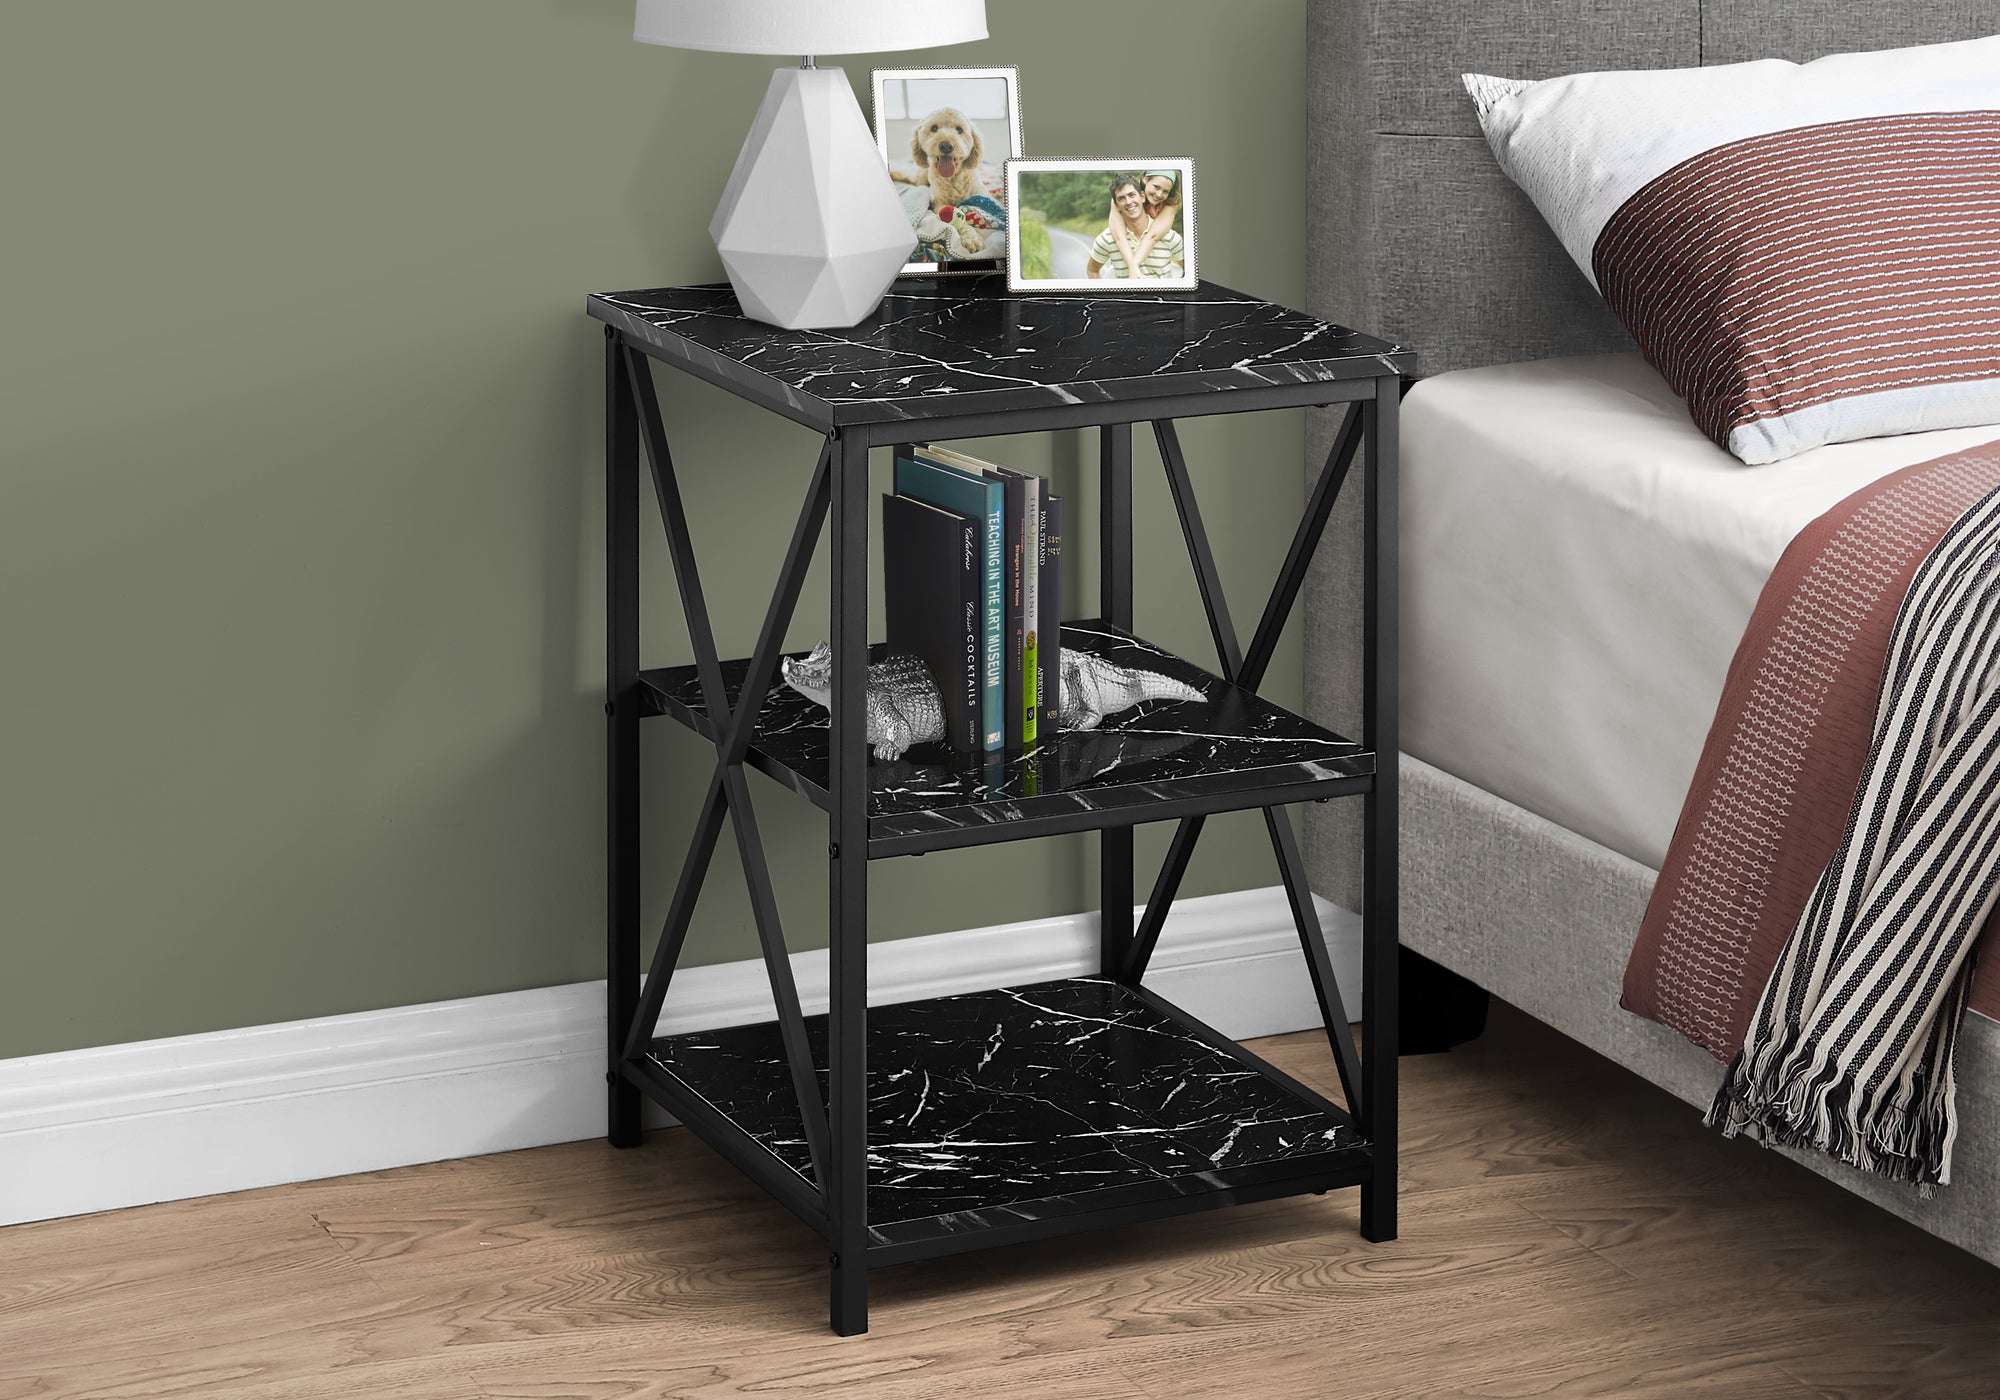 MN-533595    Accent Table, Side, End, Nightstand, Lamp, Living Room, Bedroom, Metal Legs, Laminate, Black Marble-Look, Contemporary, Glam, Modern